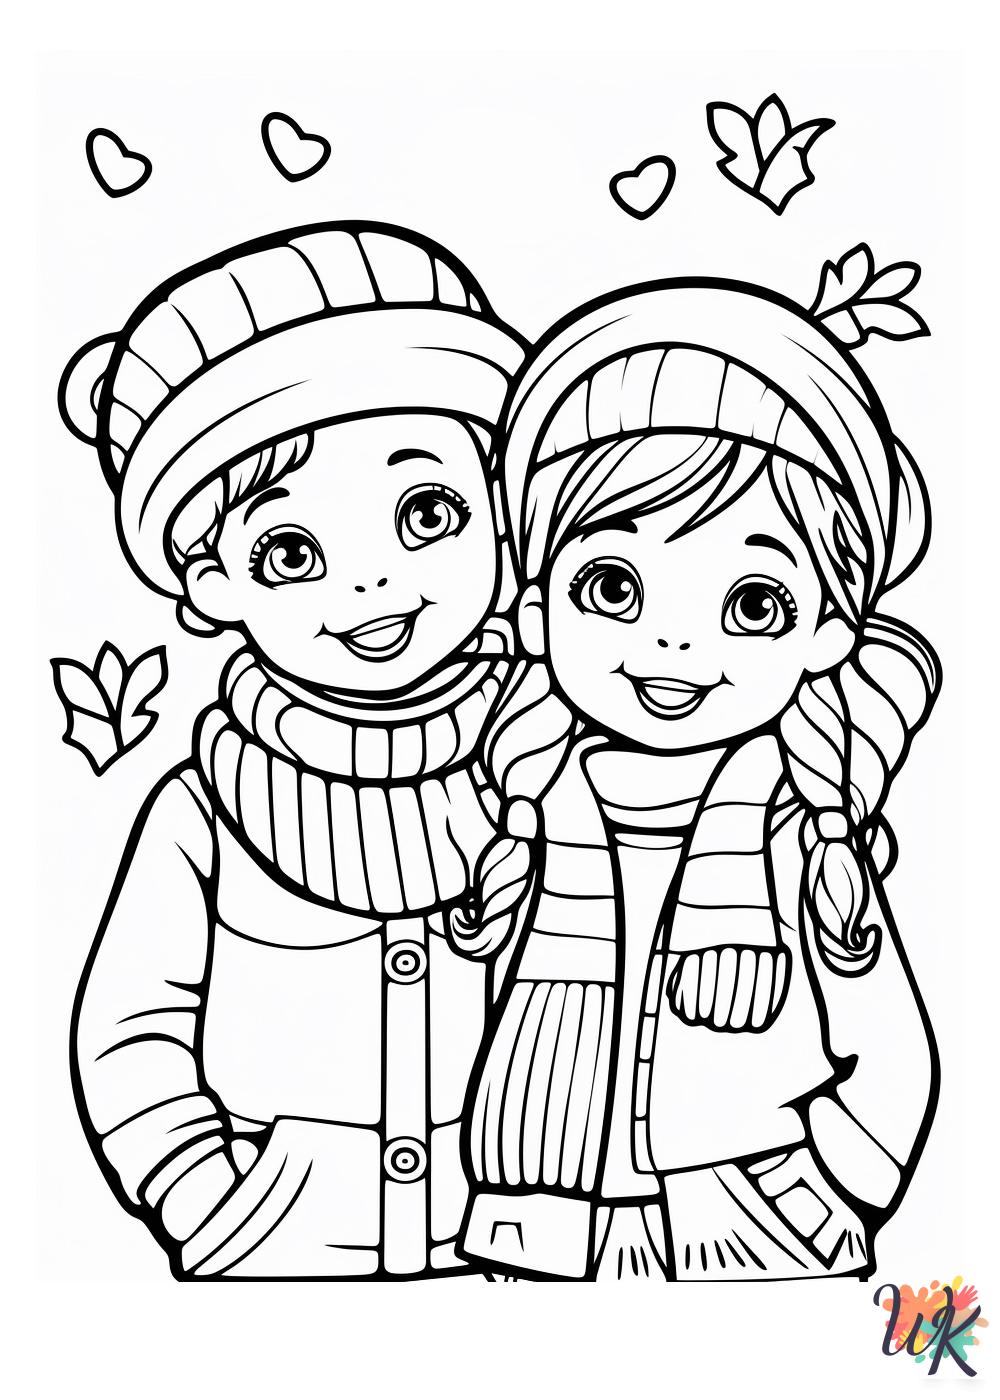 February coloring pages for adults